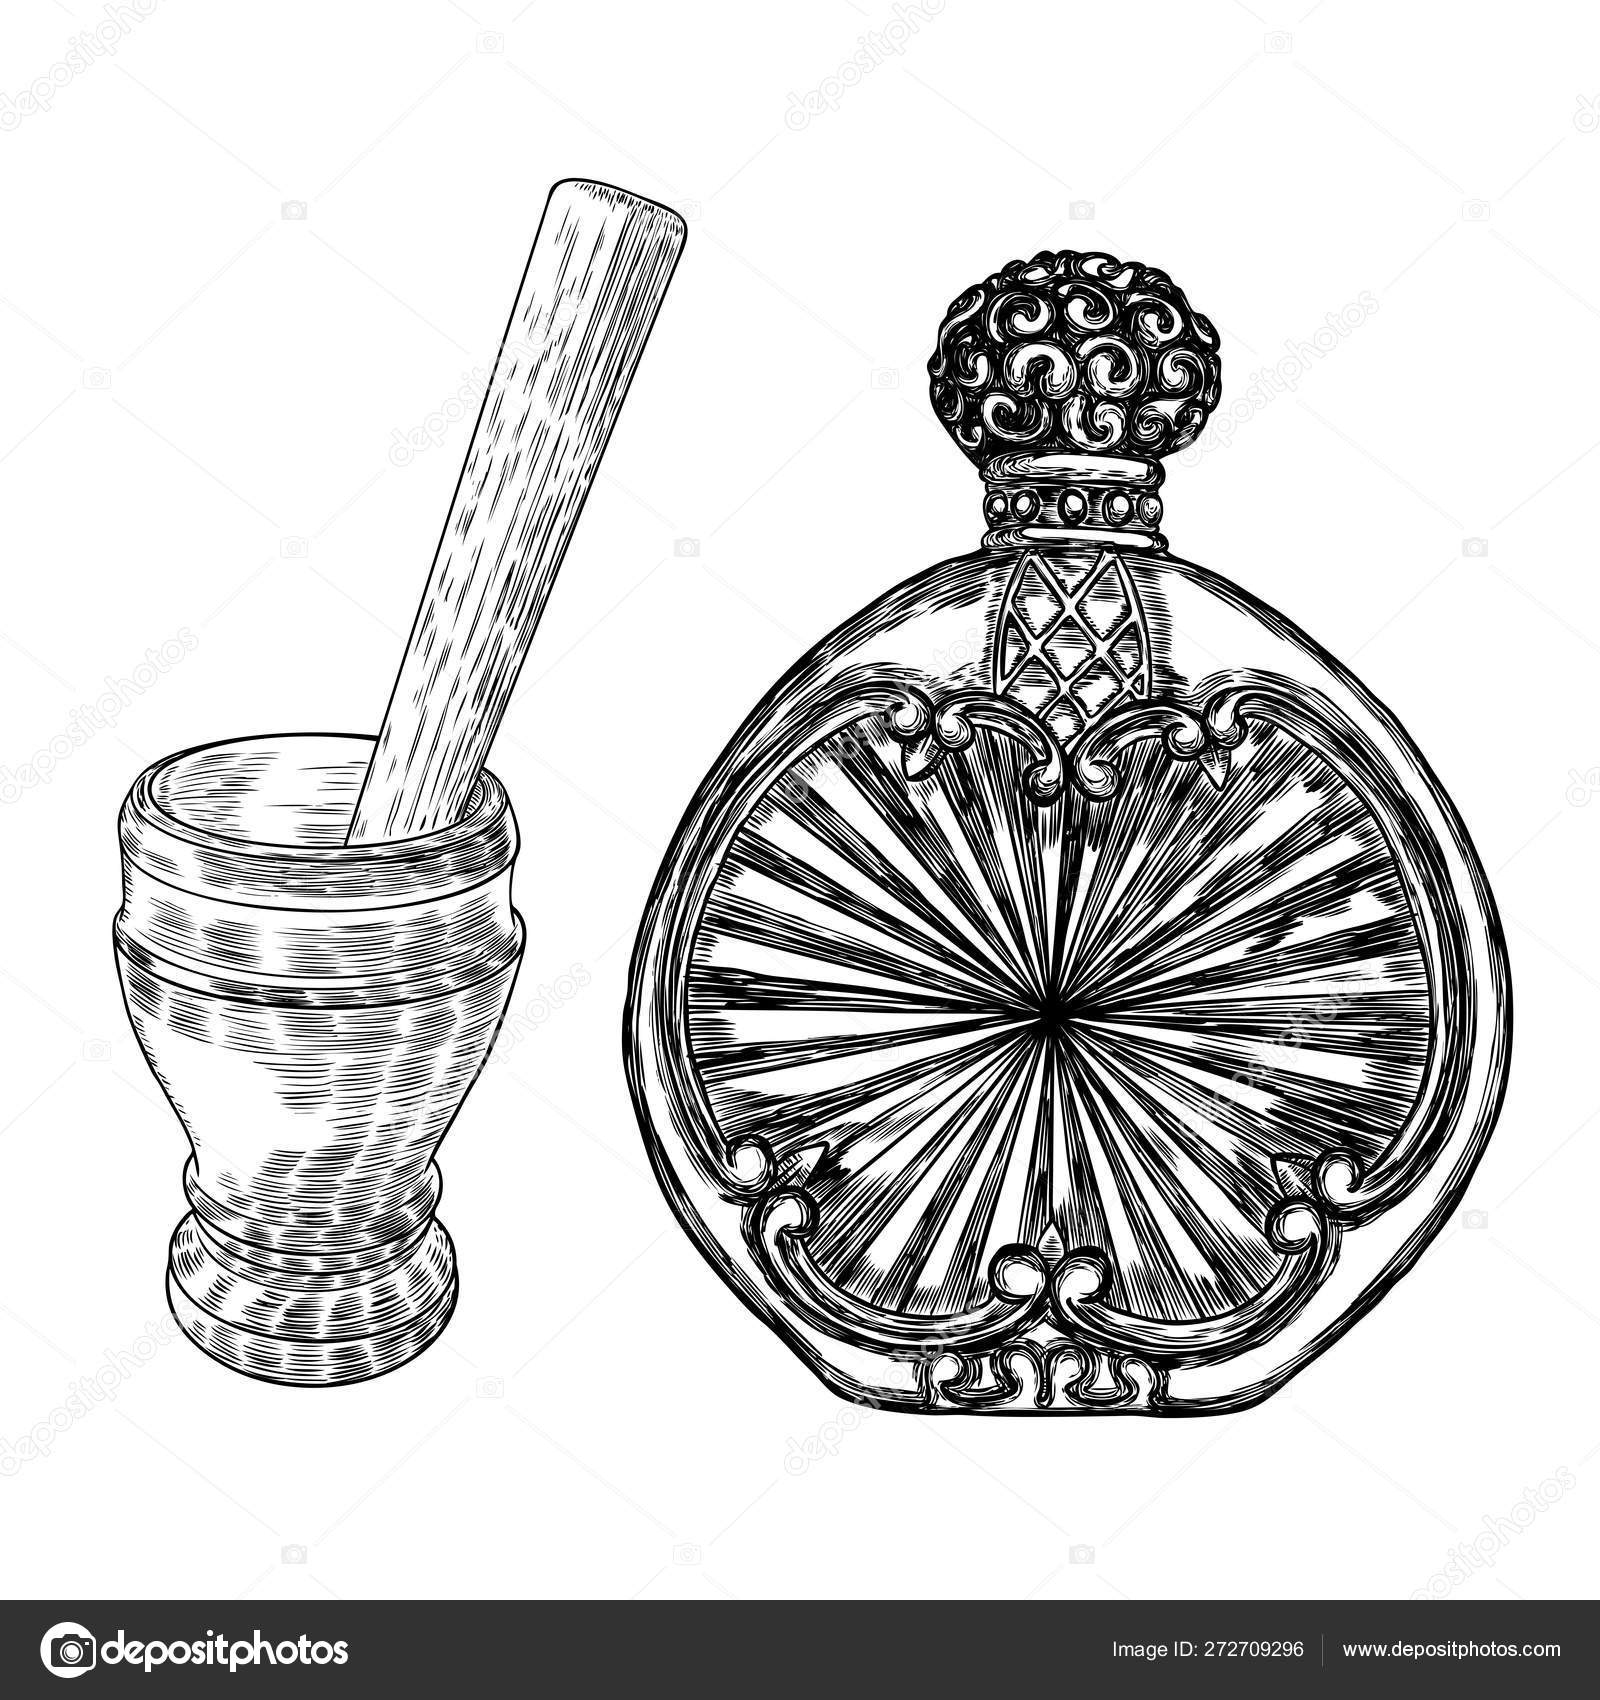 Mortar Pestle Vintage Engraving Hand Drawing Stock Vector Royalty Free  1408158191  Shutterstock